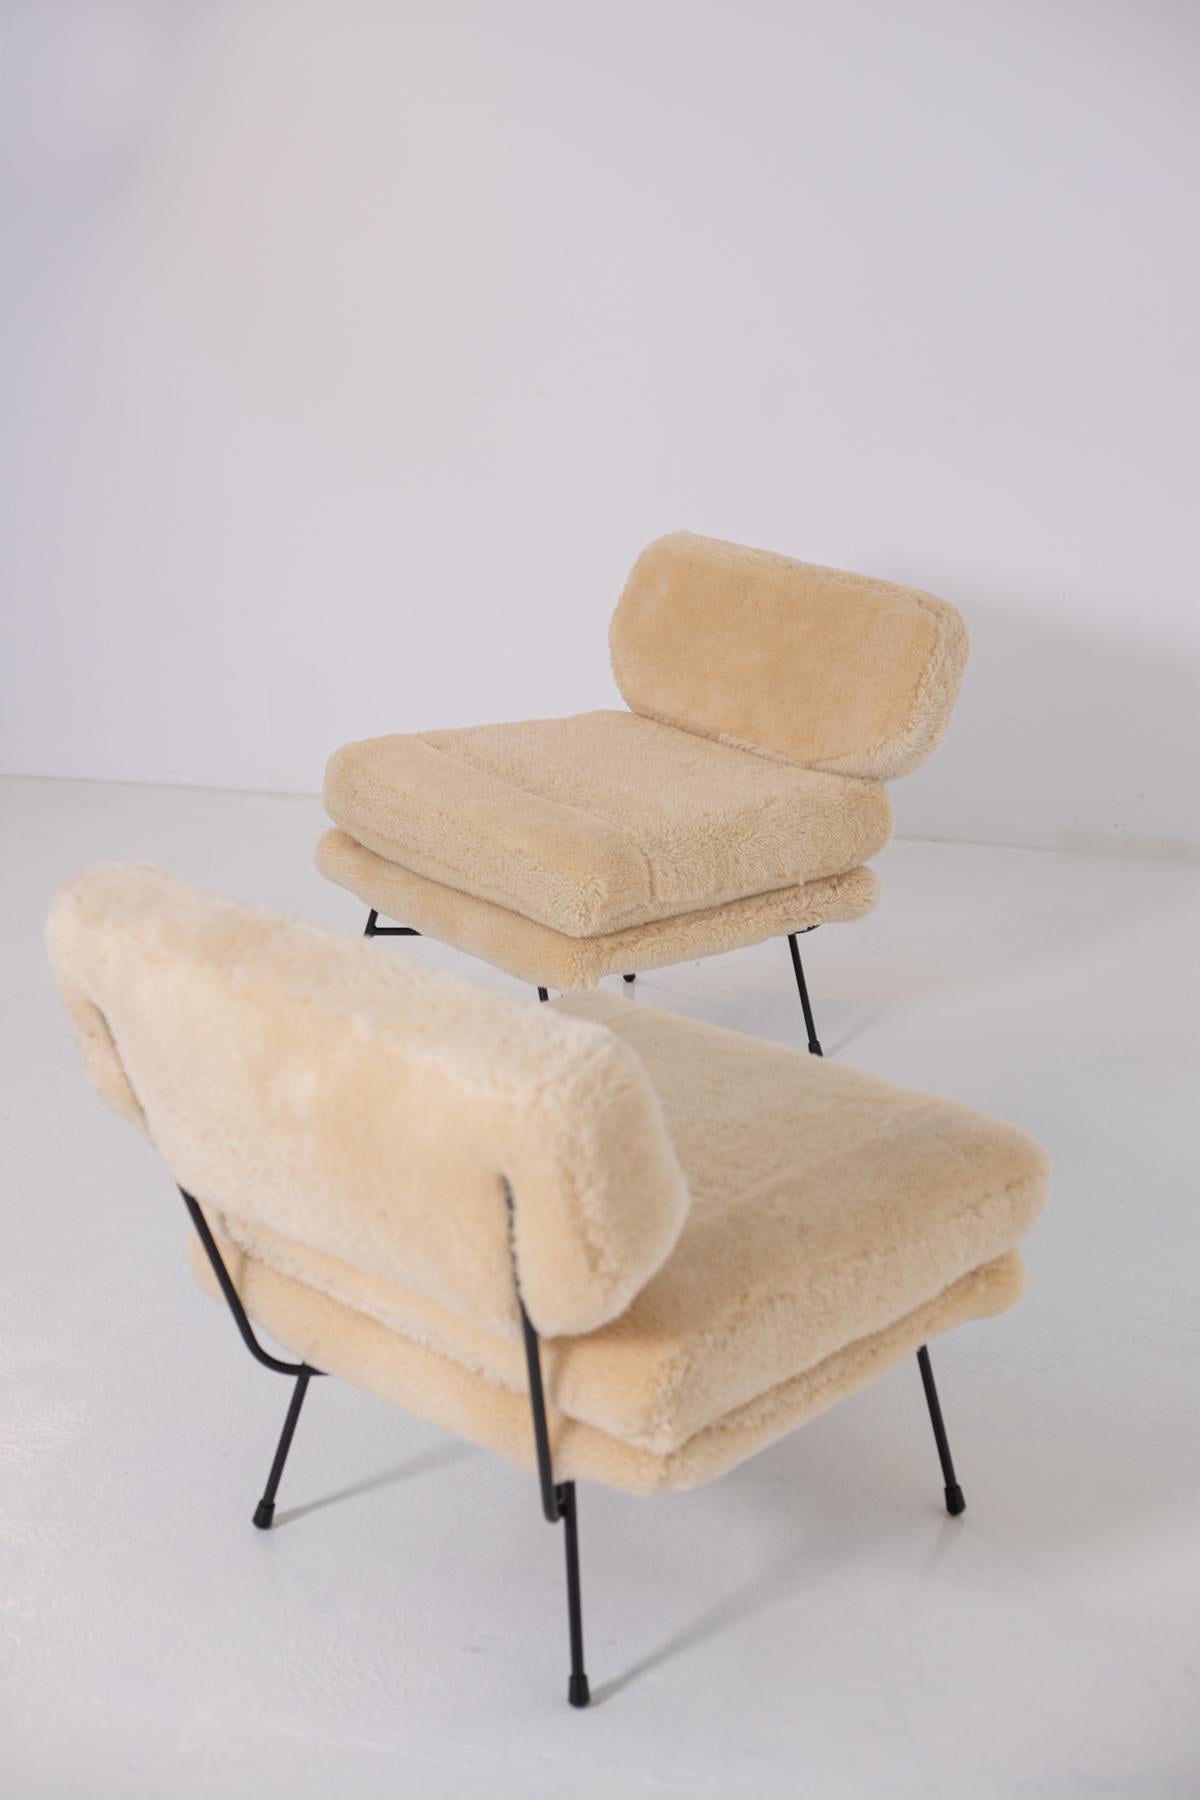 Elegant pair of armchairs by BBPR studio from the 1950s. The pair of armchairs have been refreshed in a warm, soft Italian sheepskin. Its frame is made of black painted iron. In the feet we find rubber tips to keep the armchair firmly in place.
The